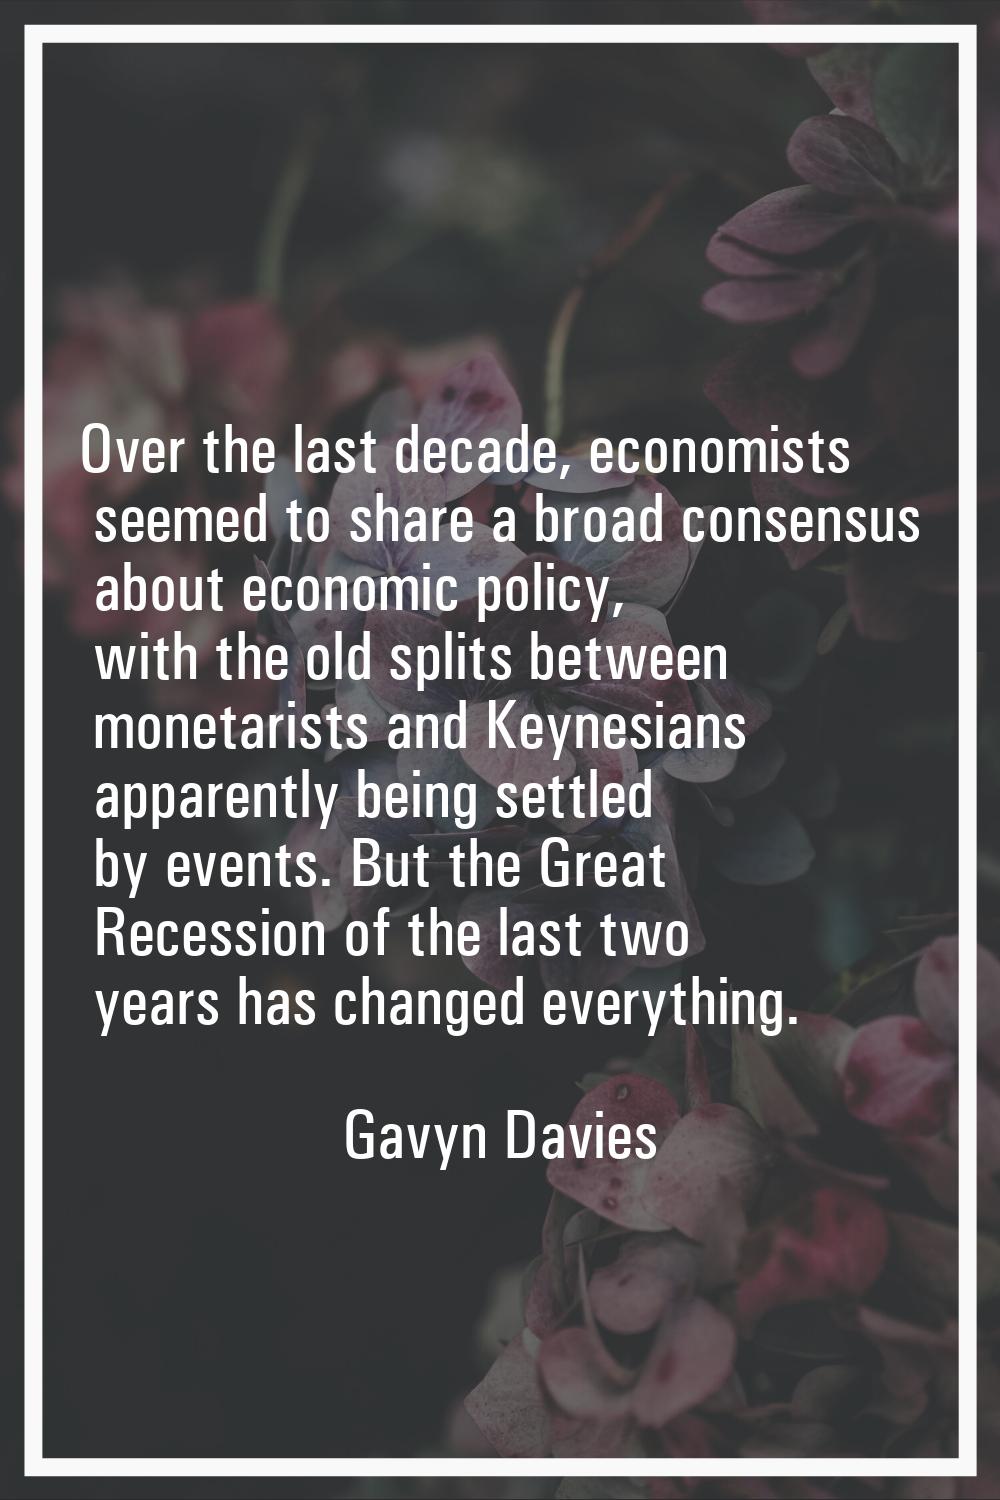 Over the last decade, economists seemed to share a broad consensus about economic policy, with the 